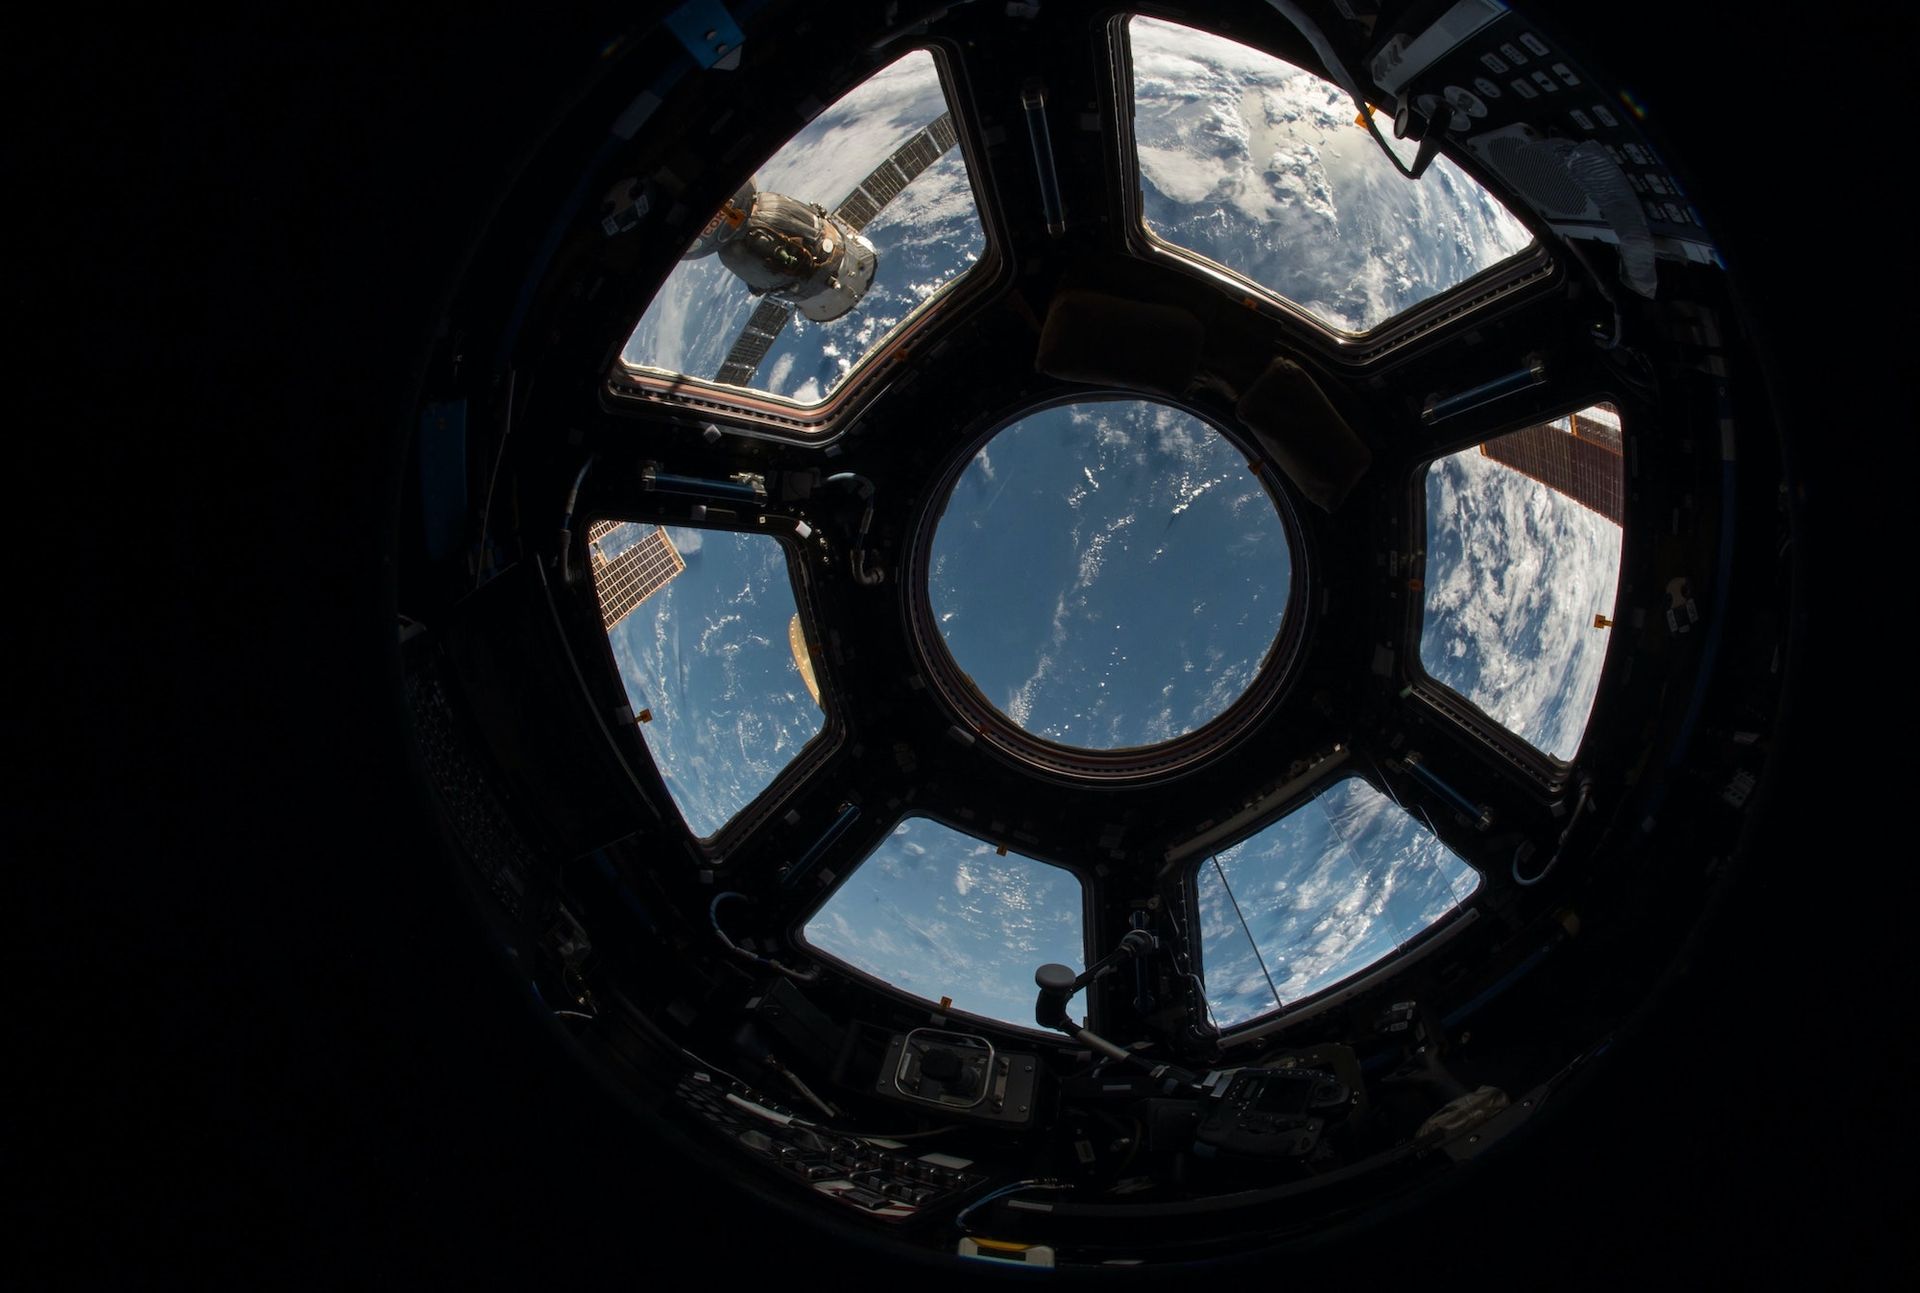 Looking out of a window of a spacestation orbiting the earth